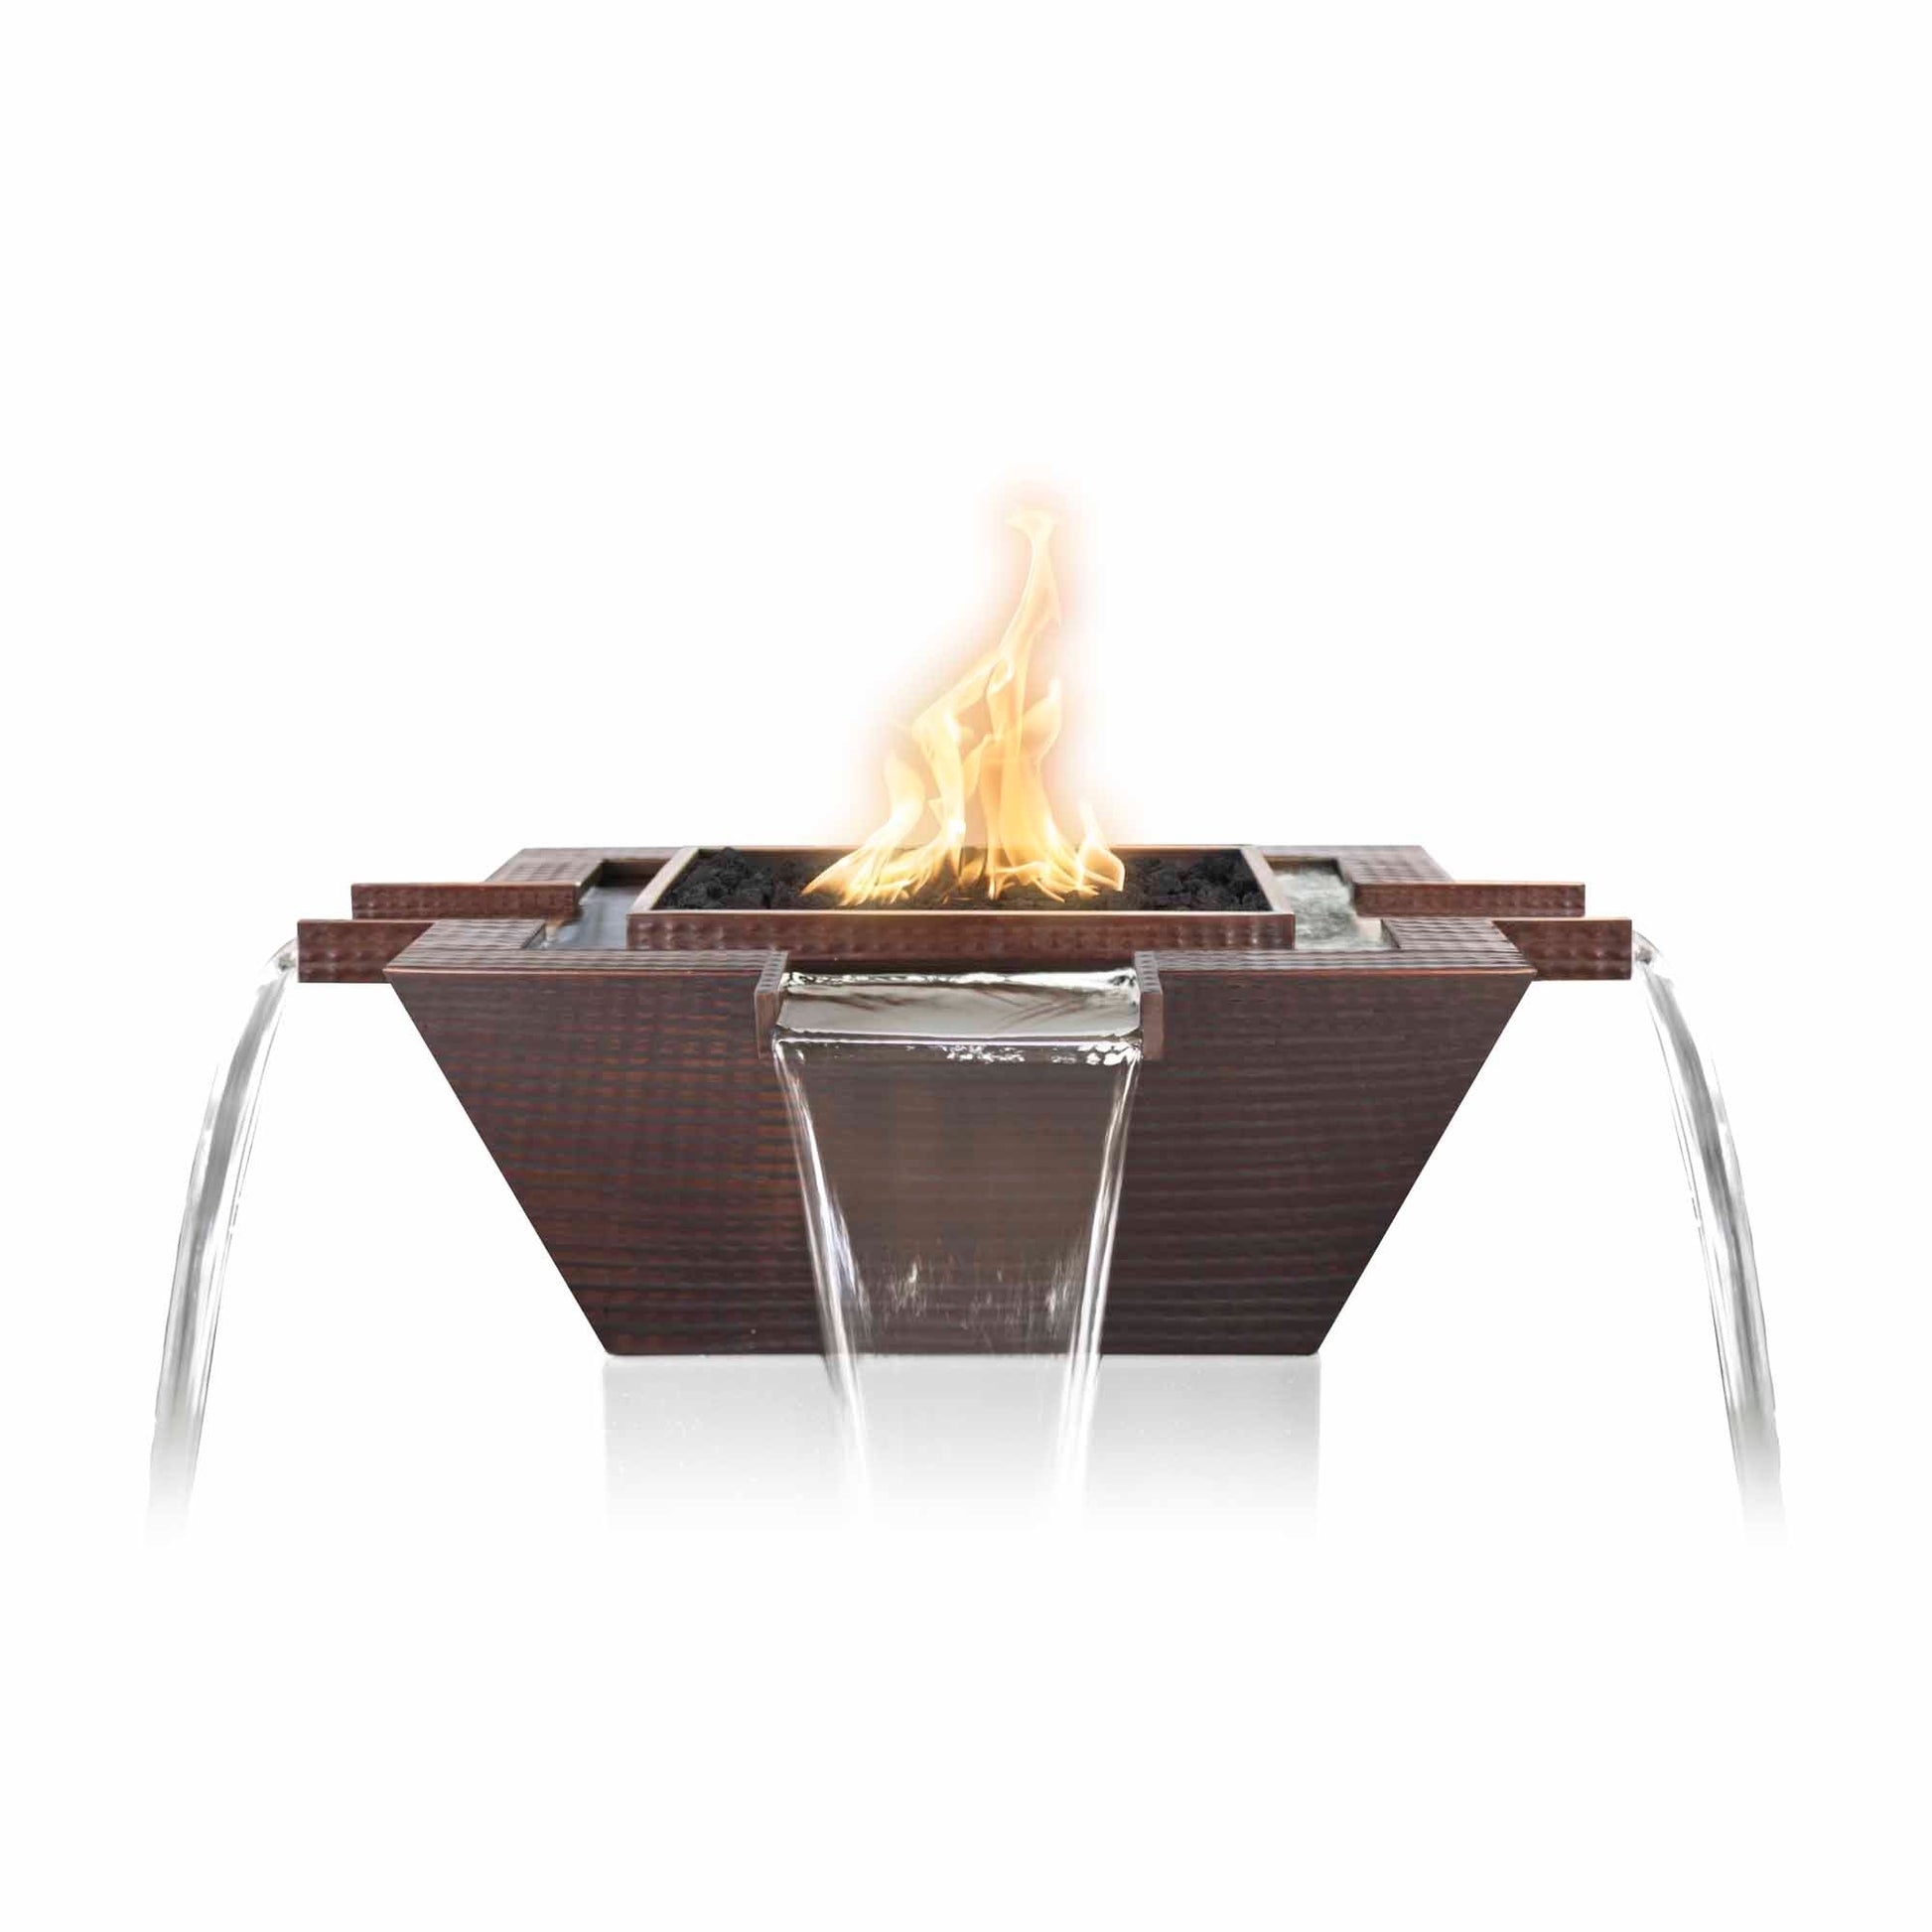 The Outdoor Plus Square Maya 30" Java Powder Coated Metal Liquid Propane Fire & Water Bowl 4-Way Spill with Match Lit Ignition